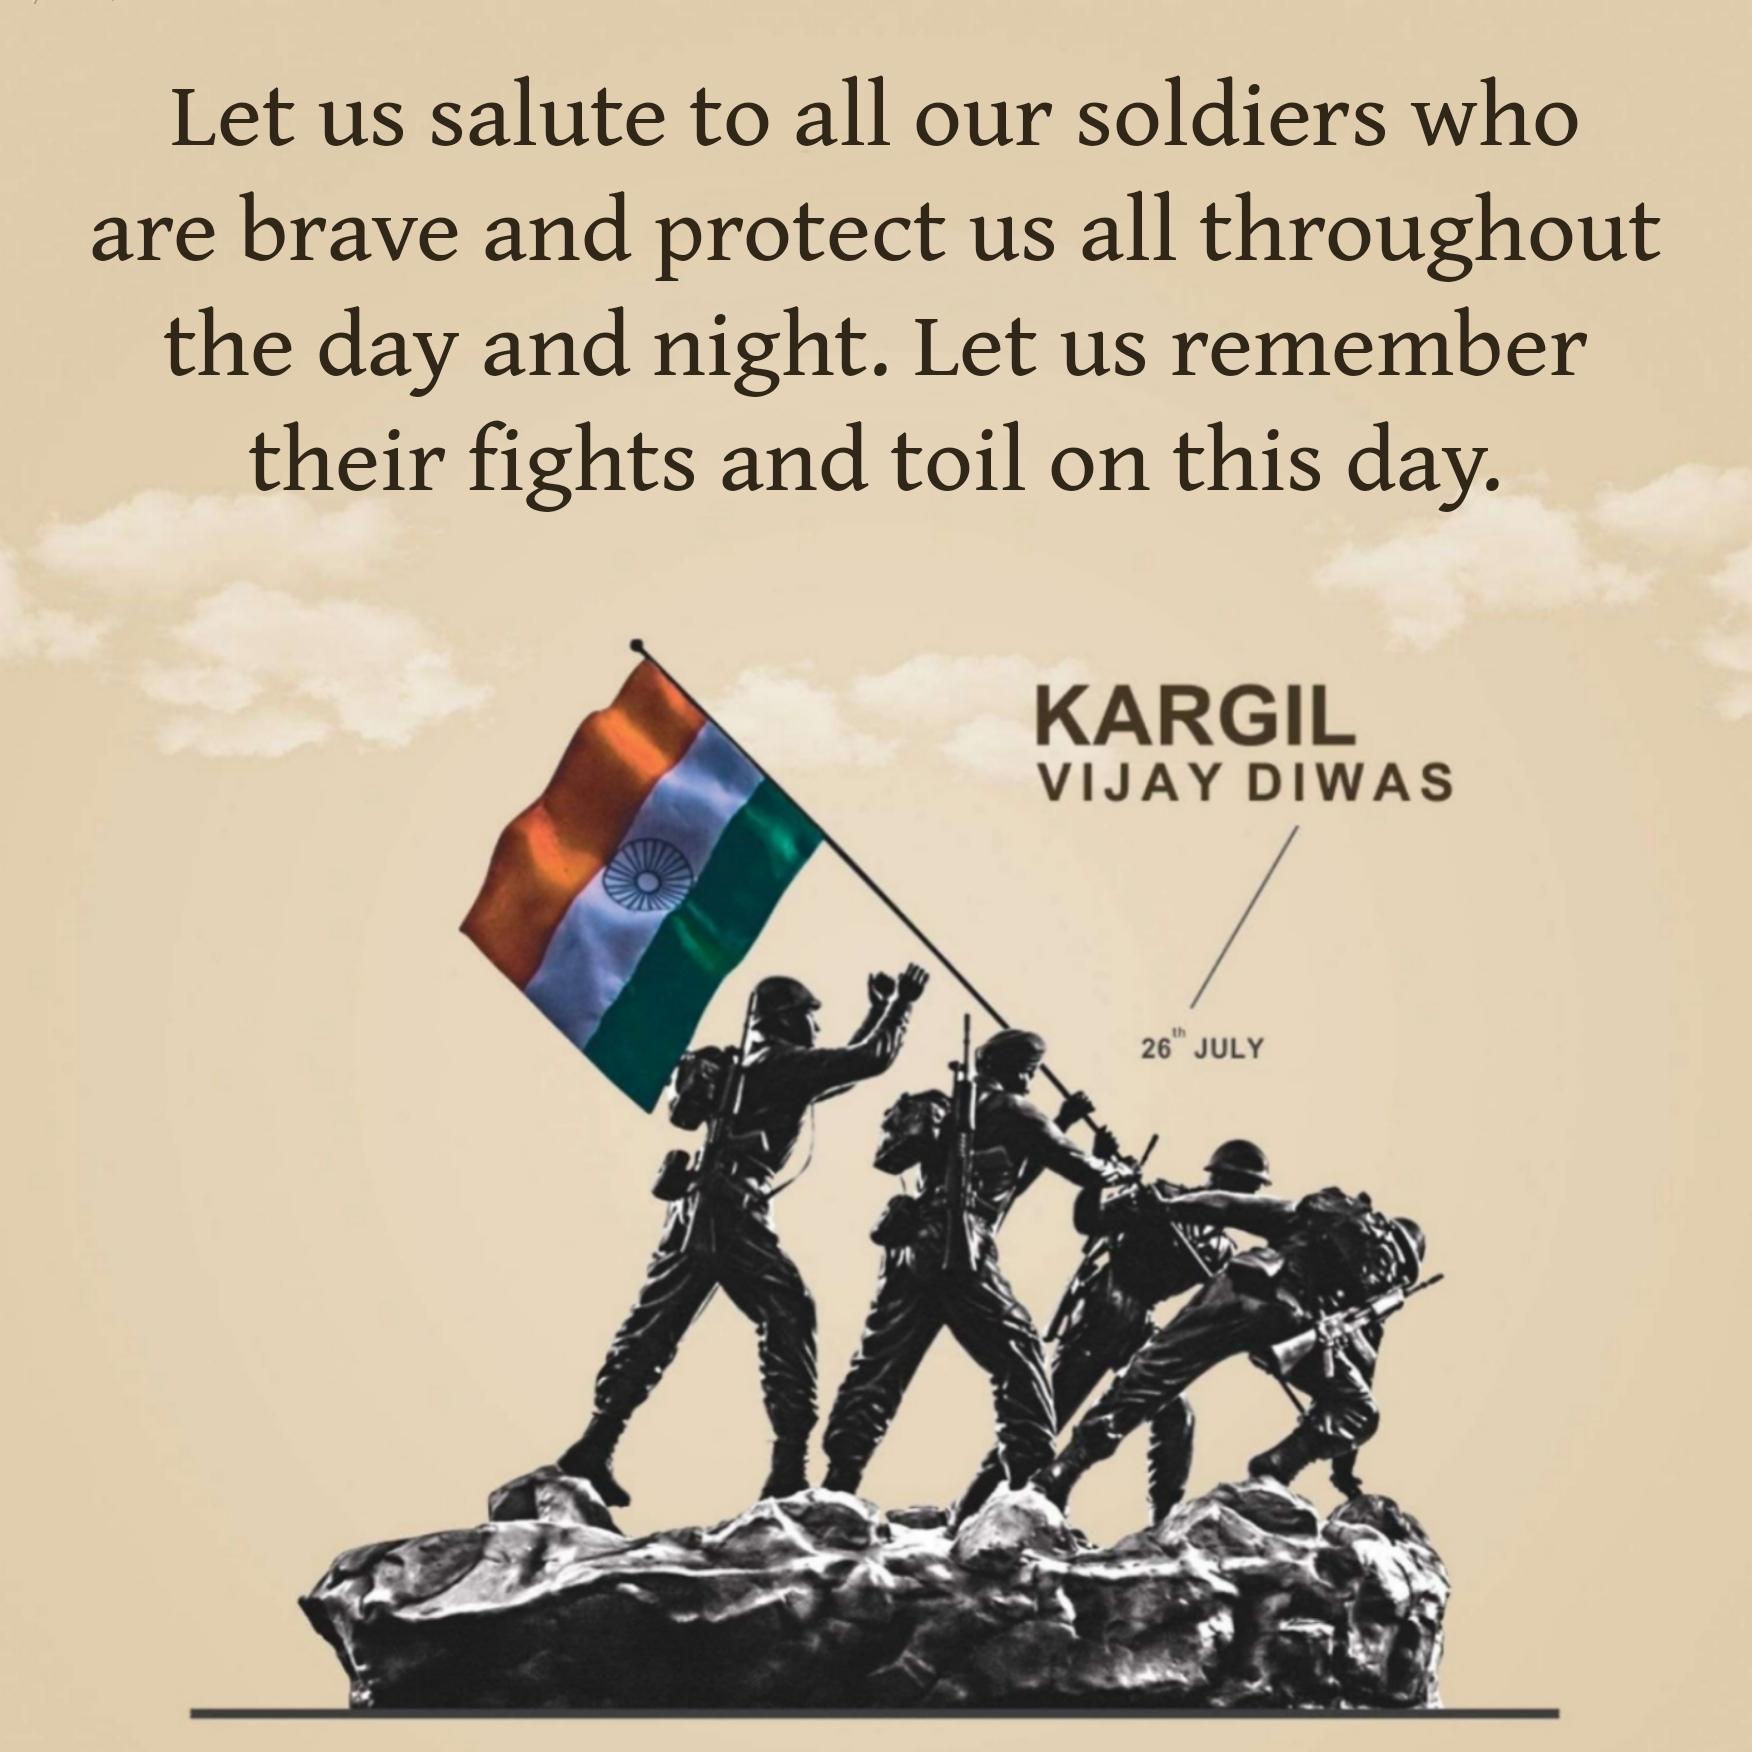 Let us salute to all our soldiers who are brave and protect us